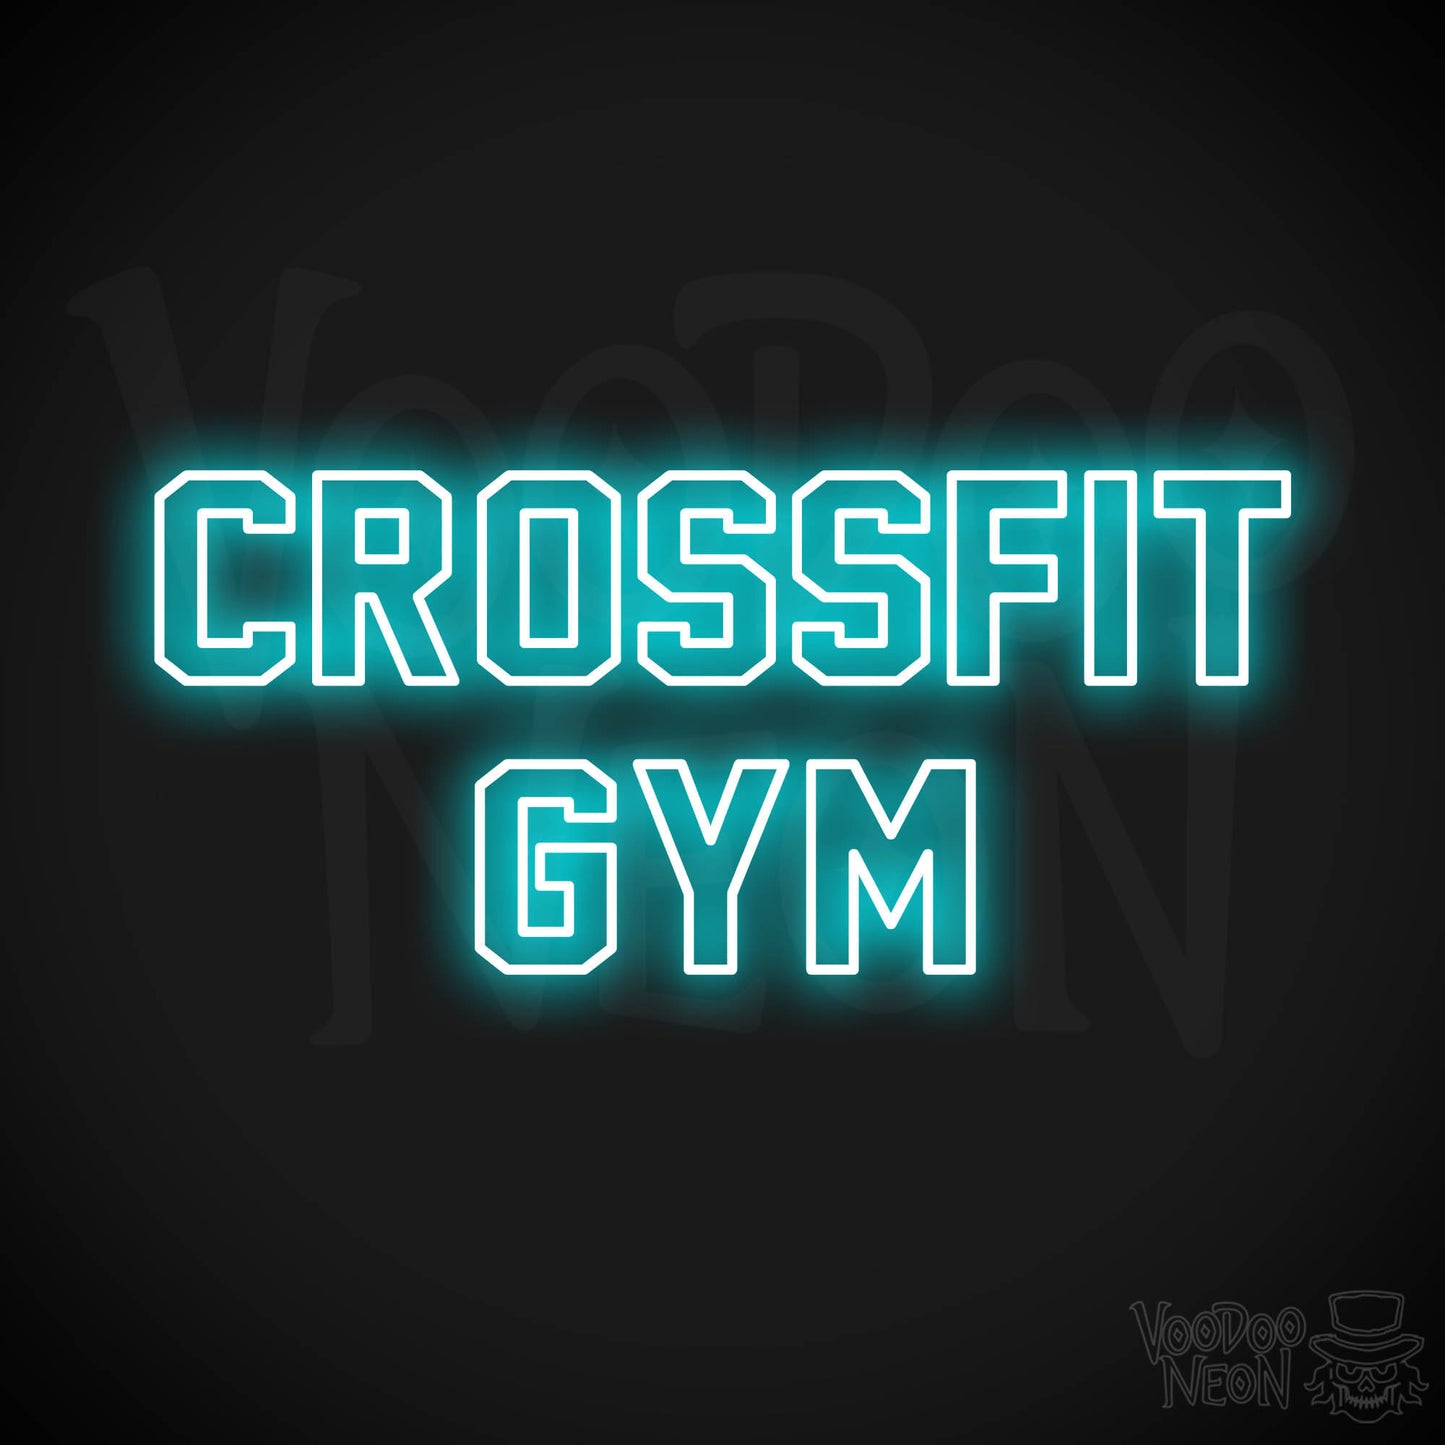 Crossfit Gym LED Neon - Ice Blue